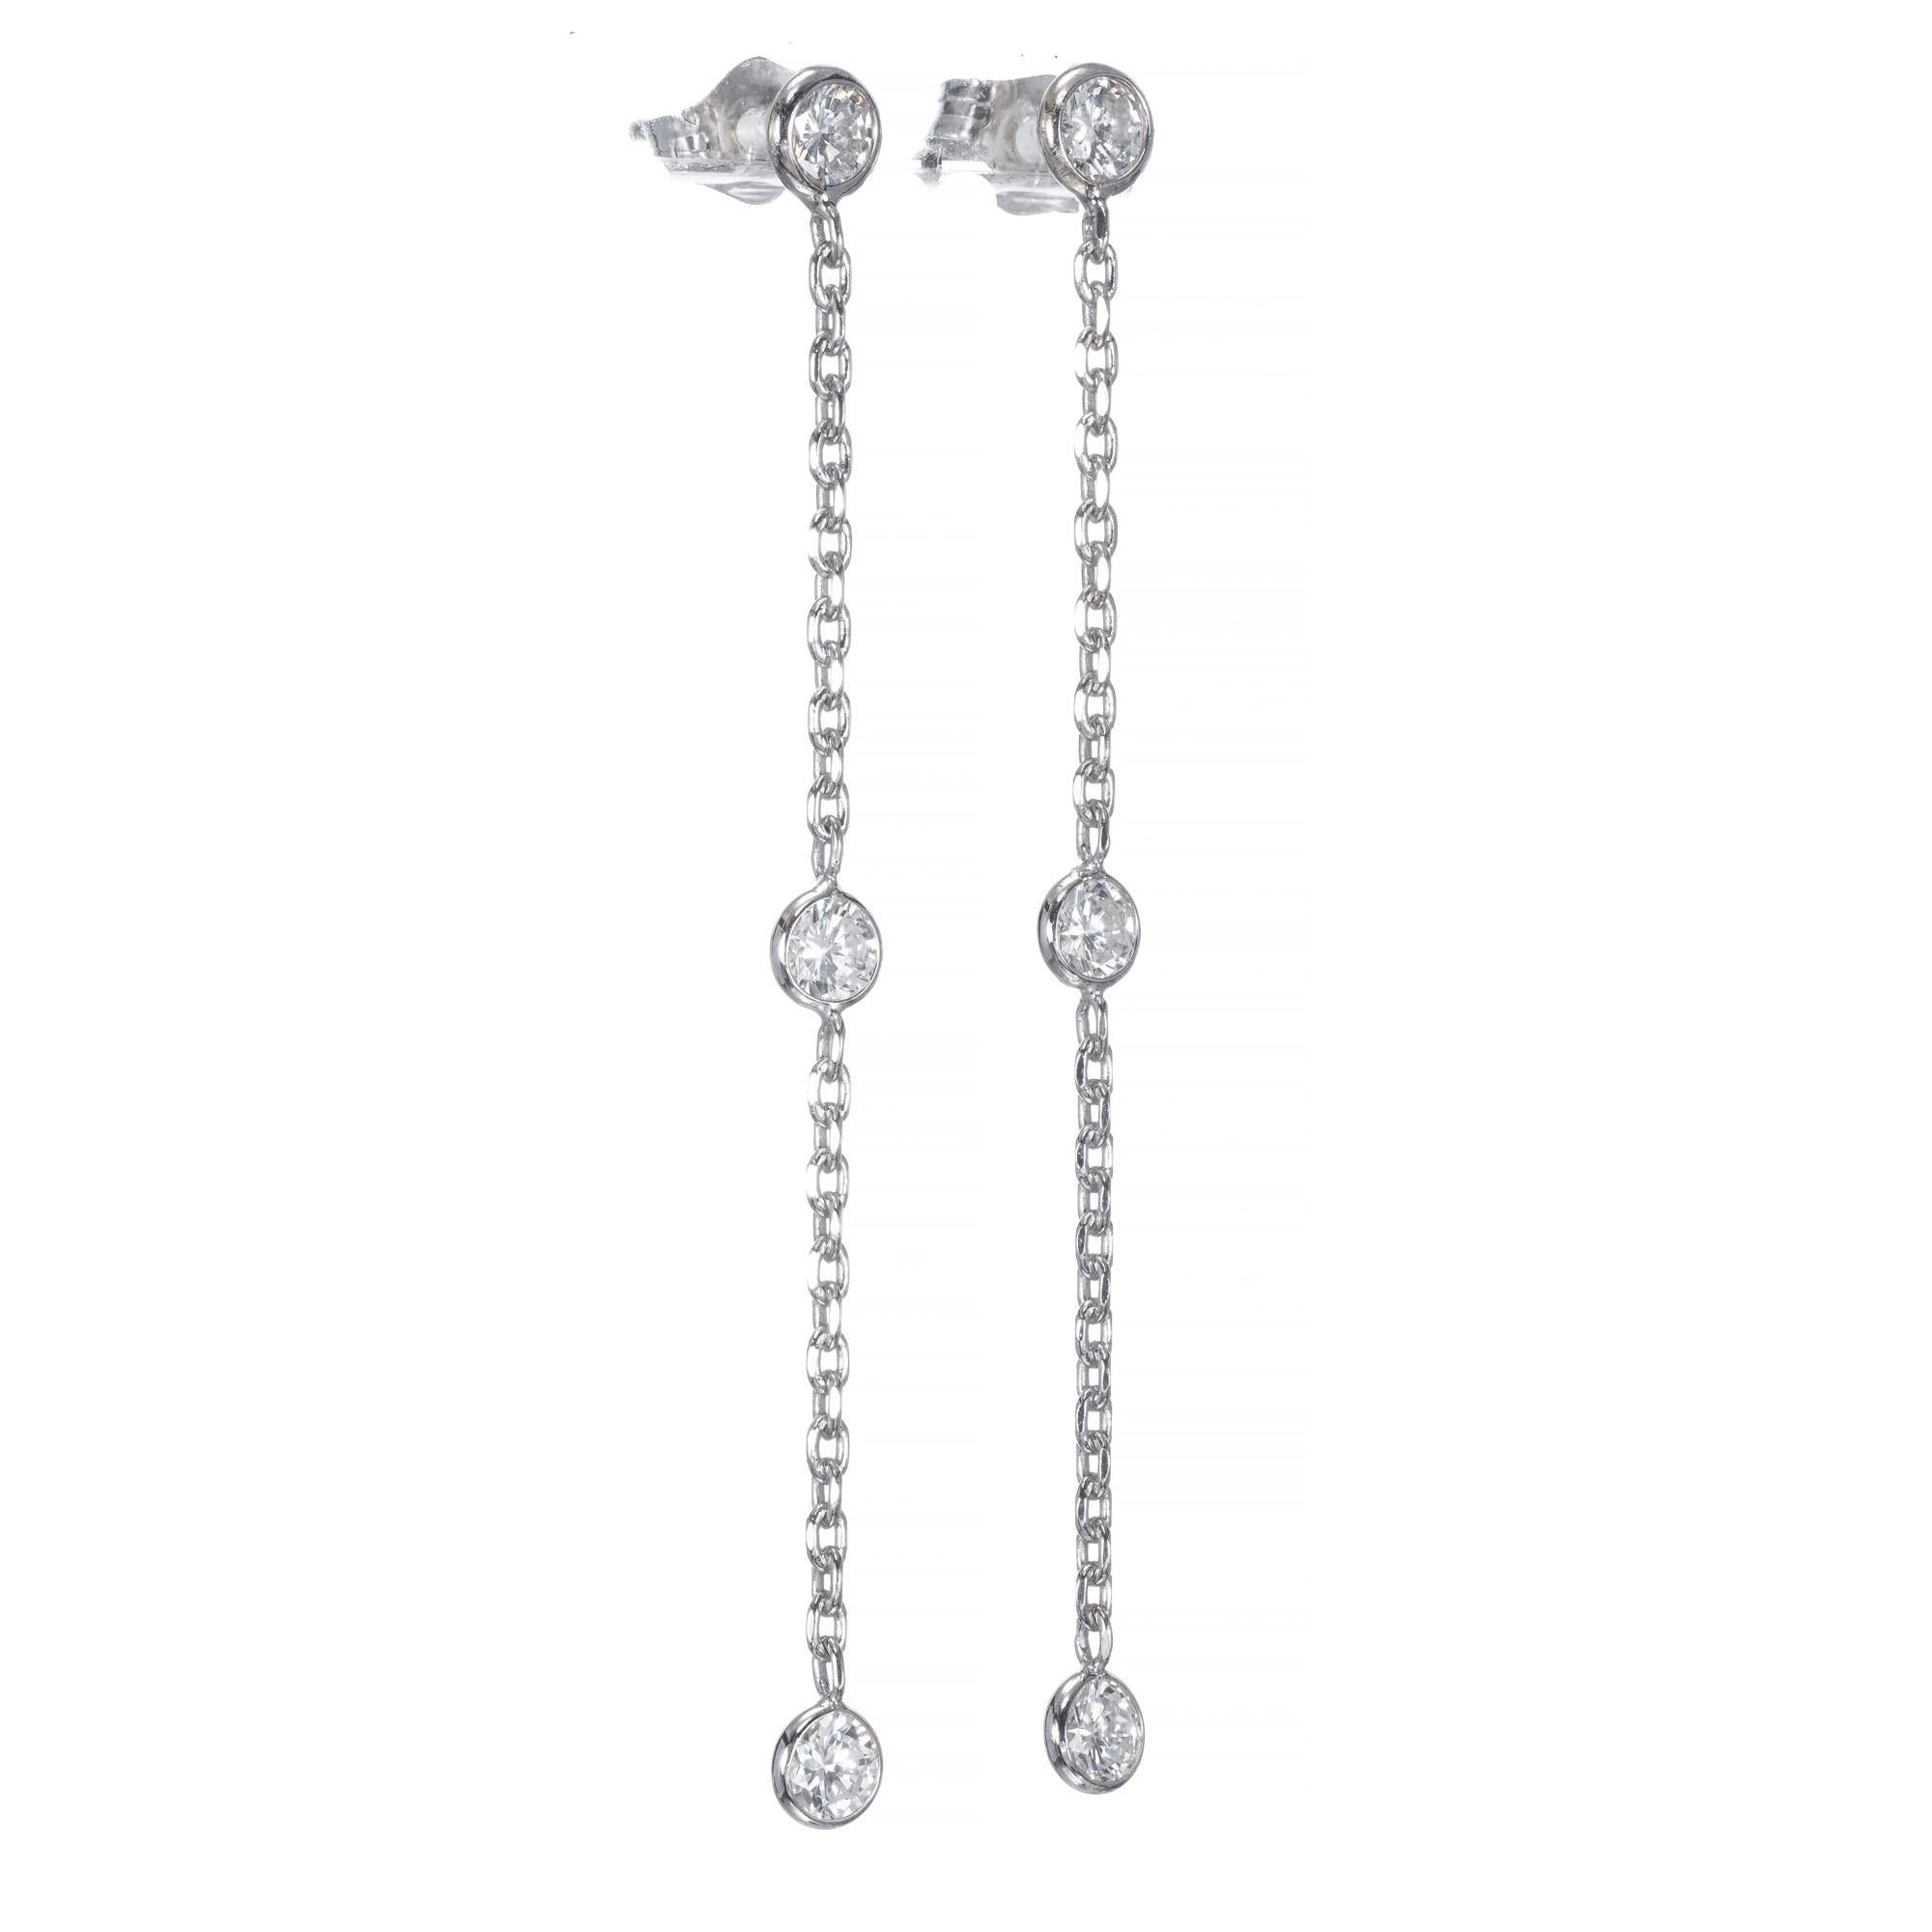 Diamond dangle drop earring. 6 diamond bezel set diamonds in 14k white gold.

6 full cut diamonds, approx. total weight .75cts, G to H, VS2 to SI1
14k White Gold
70 grams
Top to bottom: 1.88 inch or 47.84mm
Width: 3.5mm